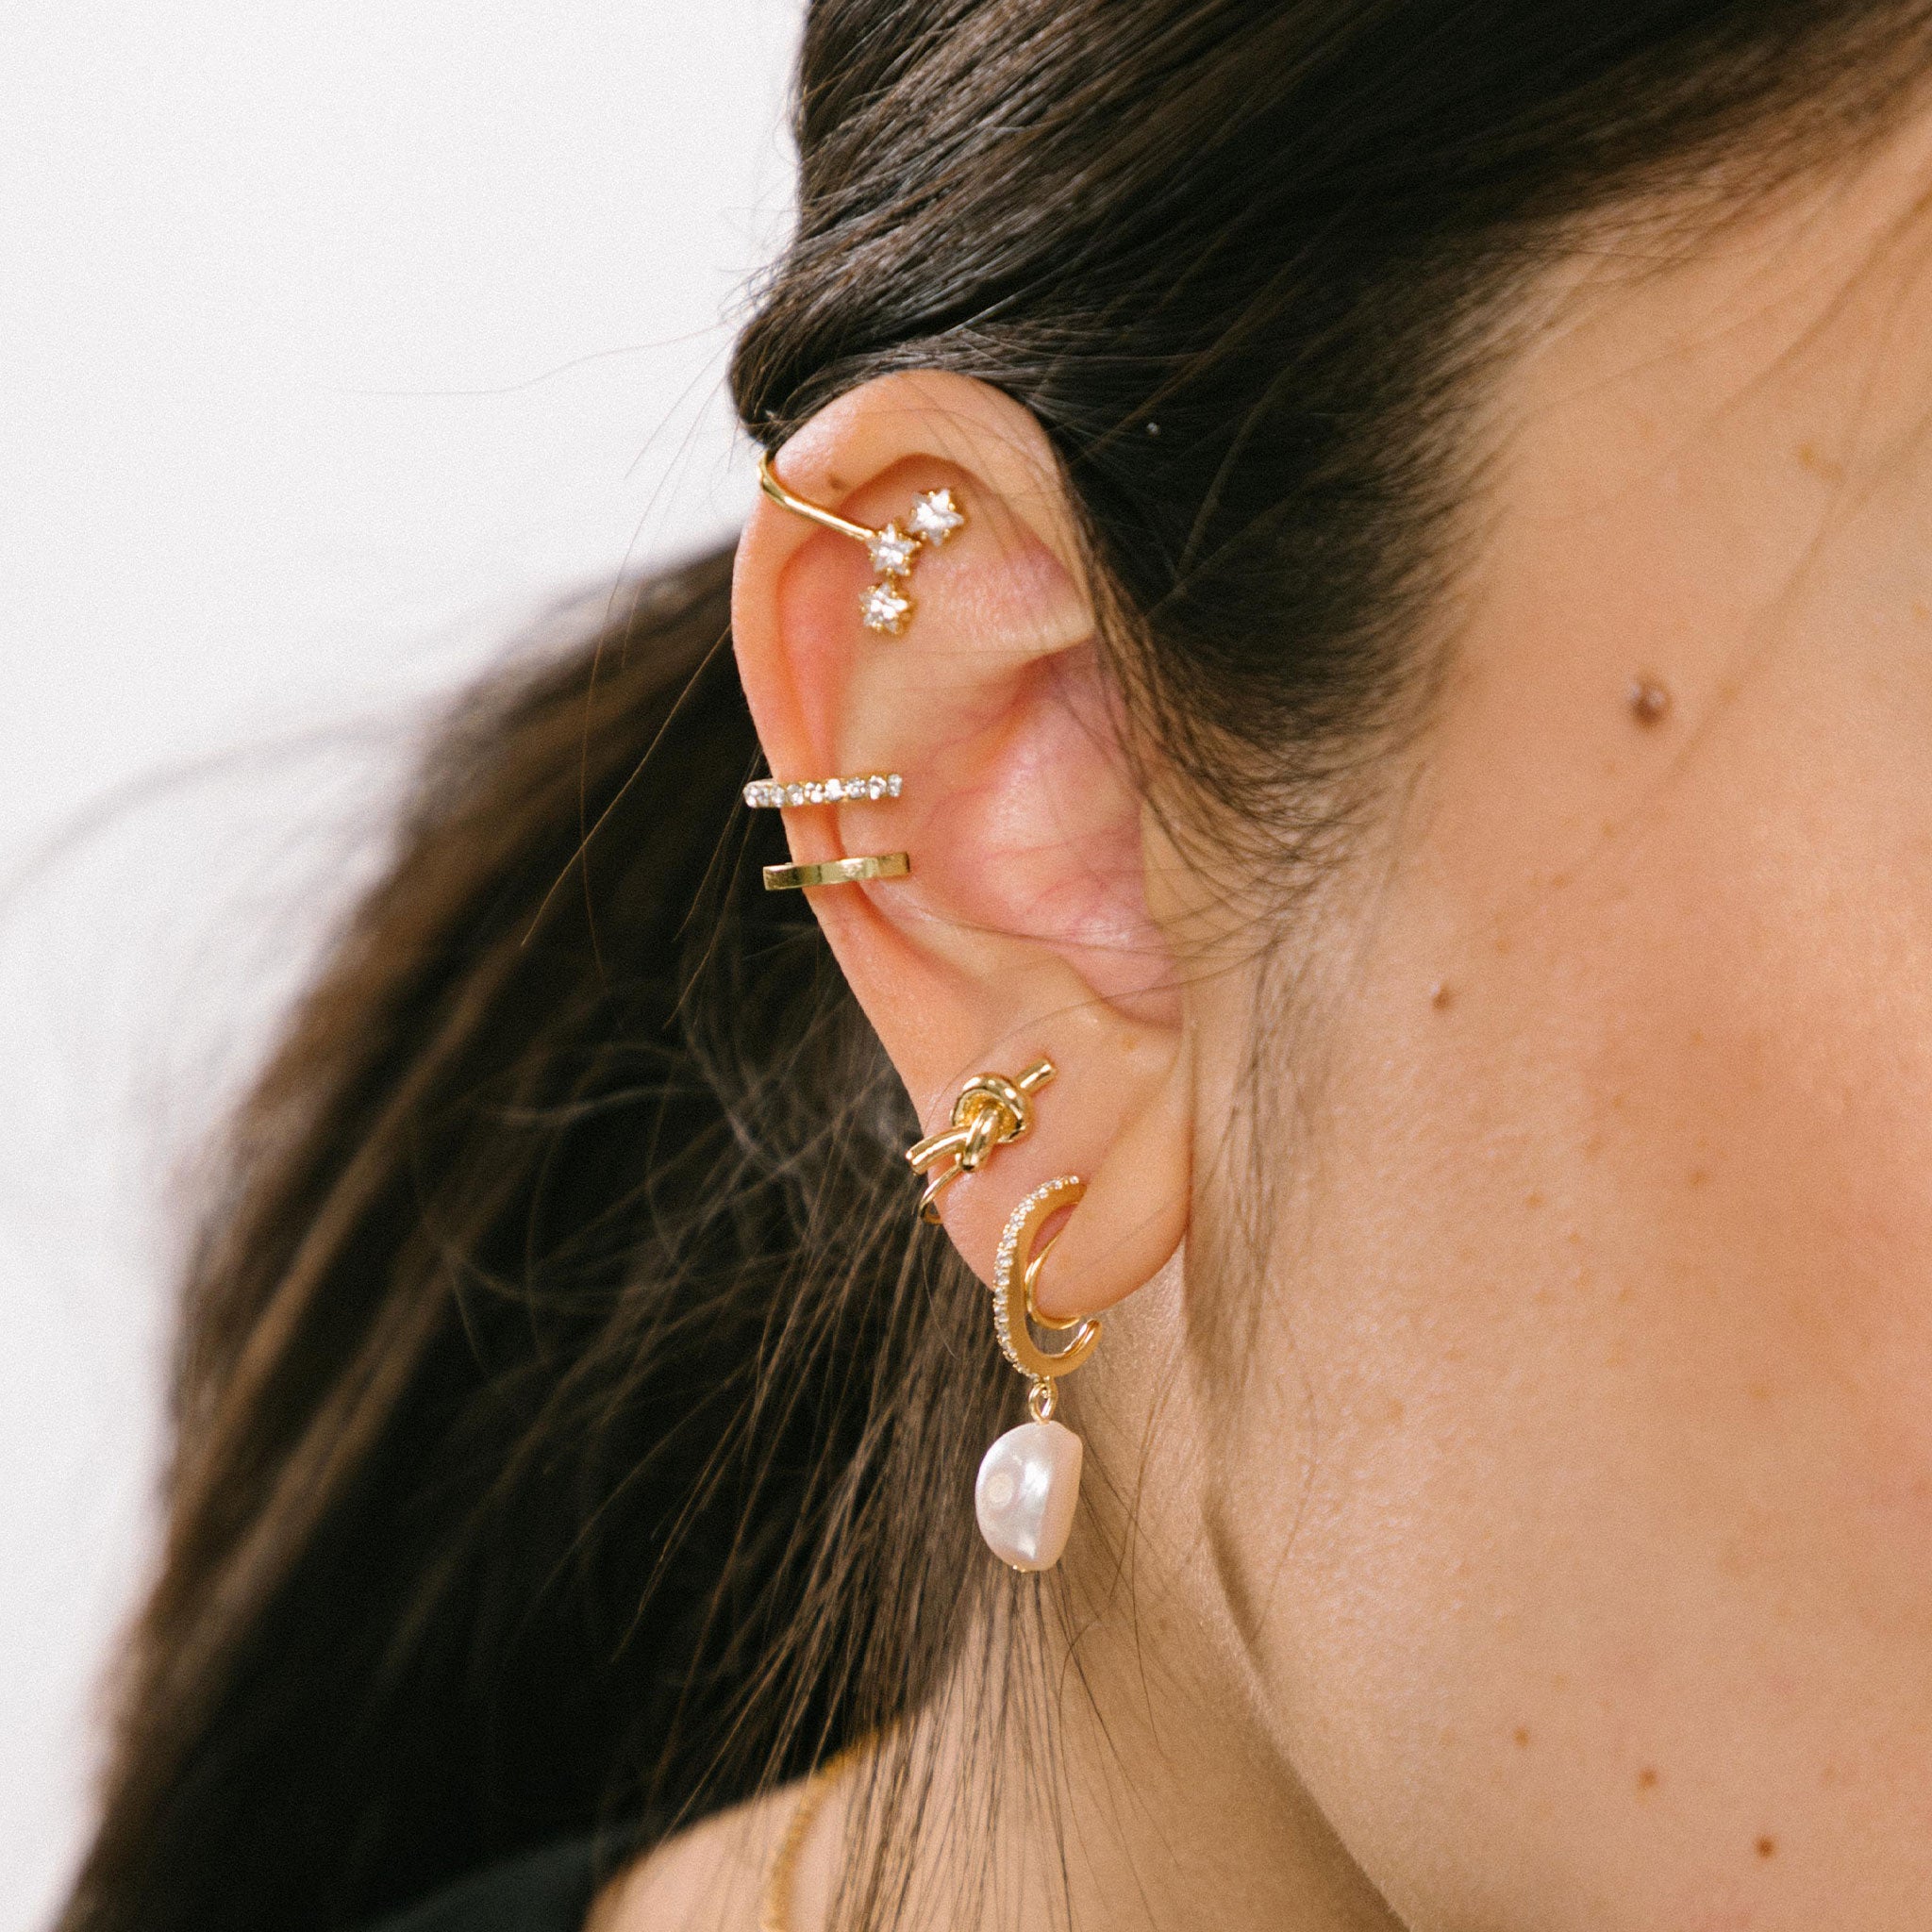 A model wearing the Pearl Pavé Huggie Clip-On Earrings in Gold offer a secure yet adjustable hold with an average comfortable wear duration of 24 hours. Featuring high-quality Freshwater Pearls and 18K Gold Plated Stainless Steel, these earrings are ideal for all ear types and sizes. Each piece may vary slightly in size and color.